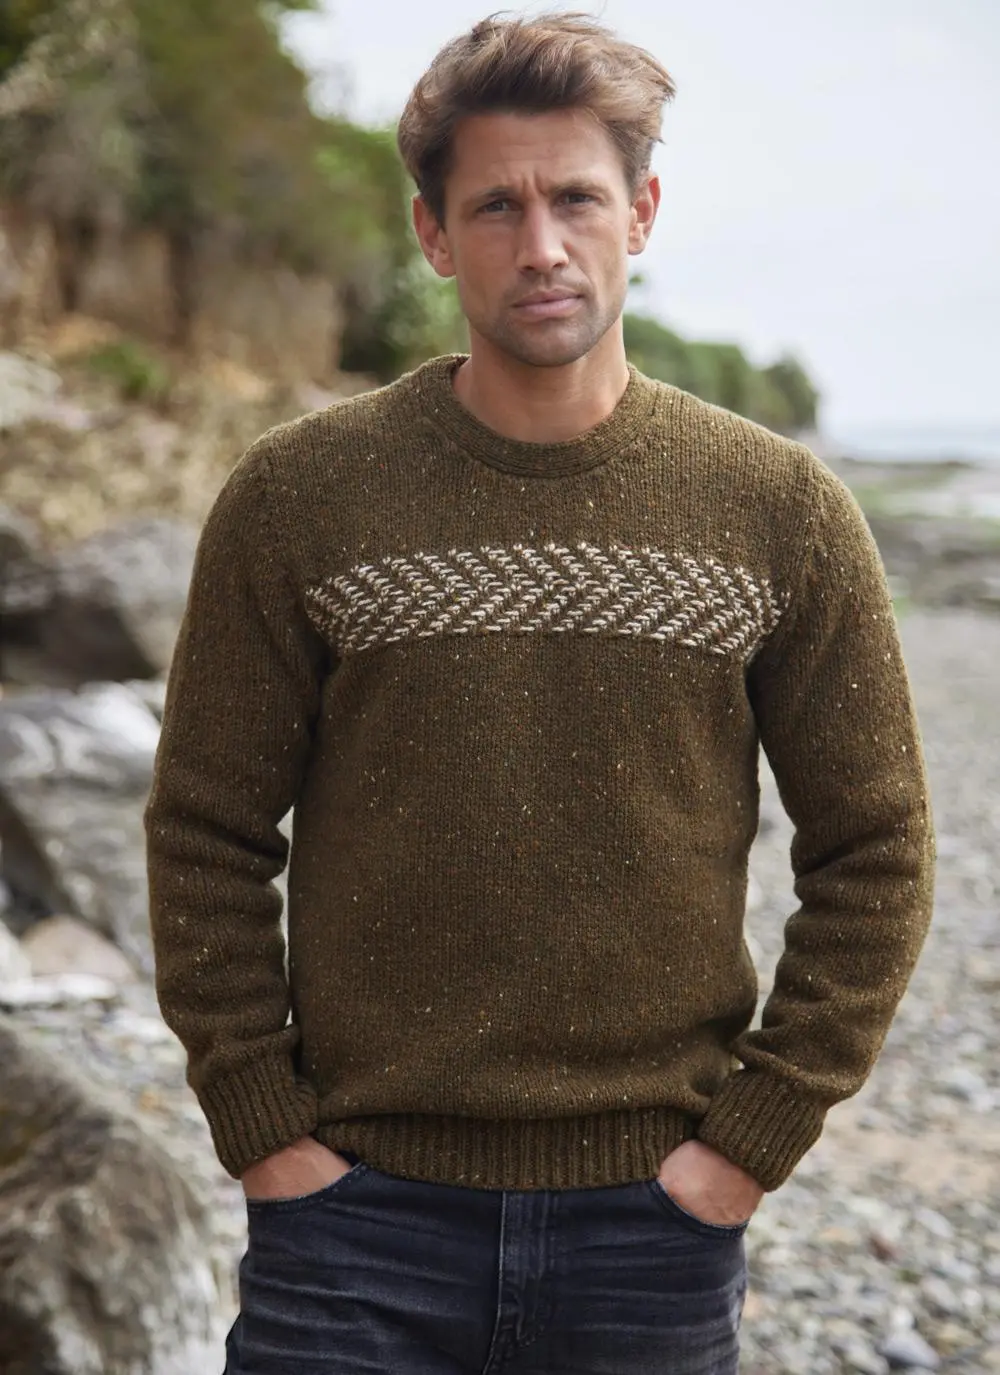 Man on beach wearing two tone crew neck sweater, hands in pockets